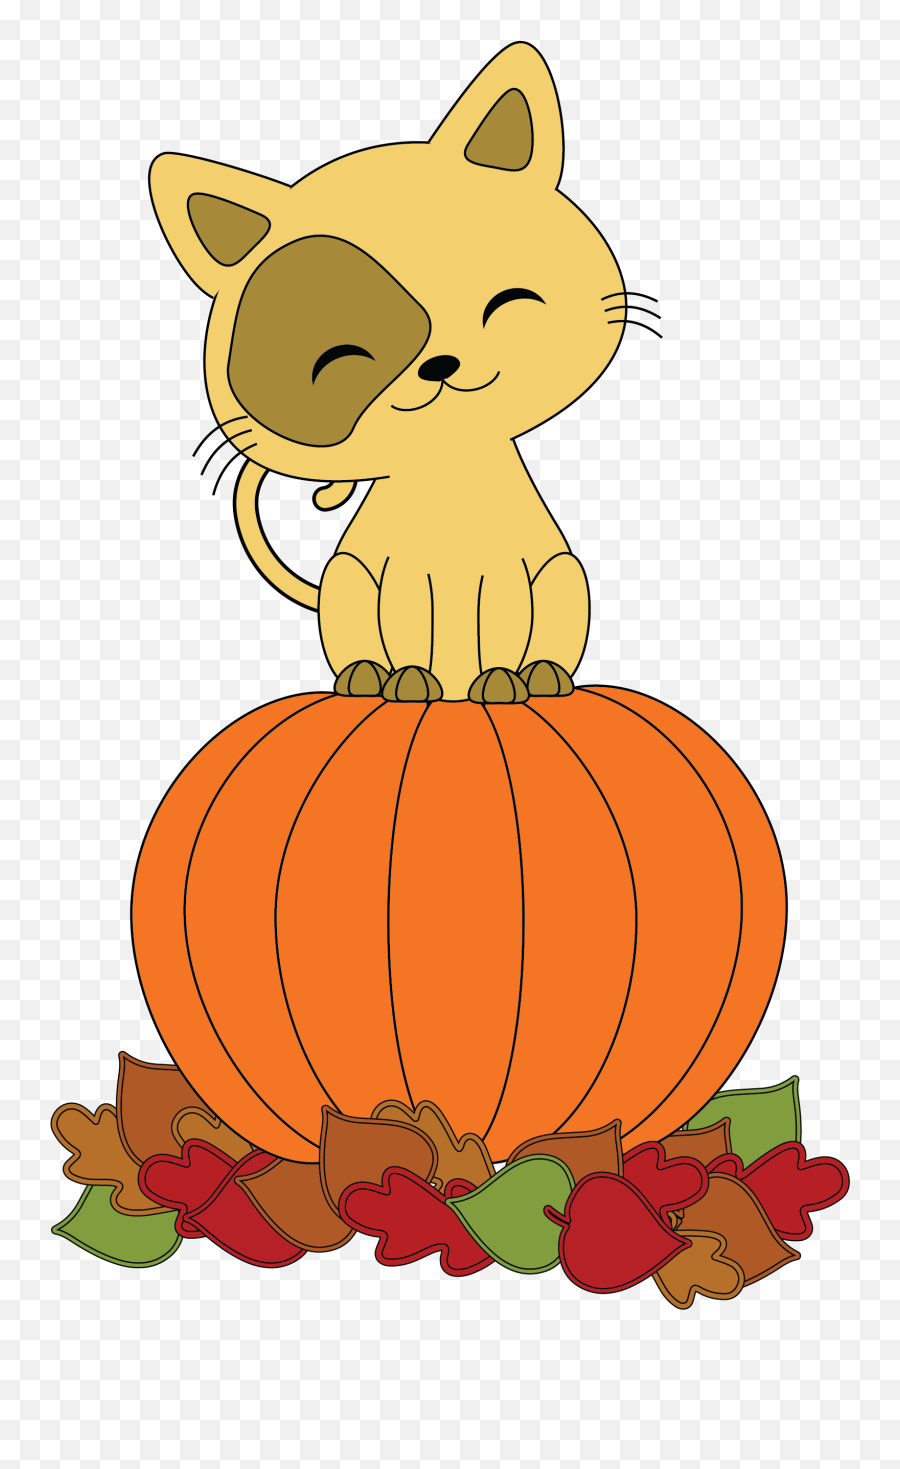 Happy Halloween Whatu0027s Your Costume Going To Be Like - Gourd Emoji,Pumkin Patch Clipart